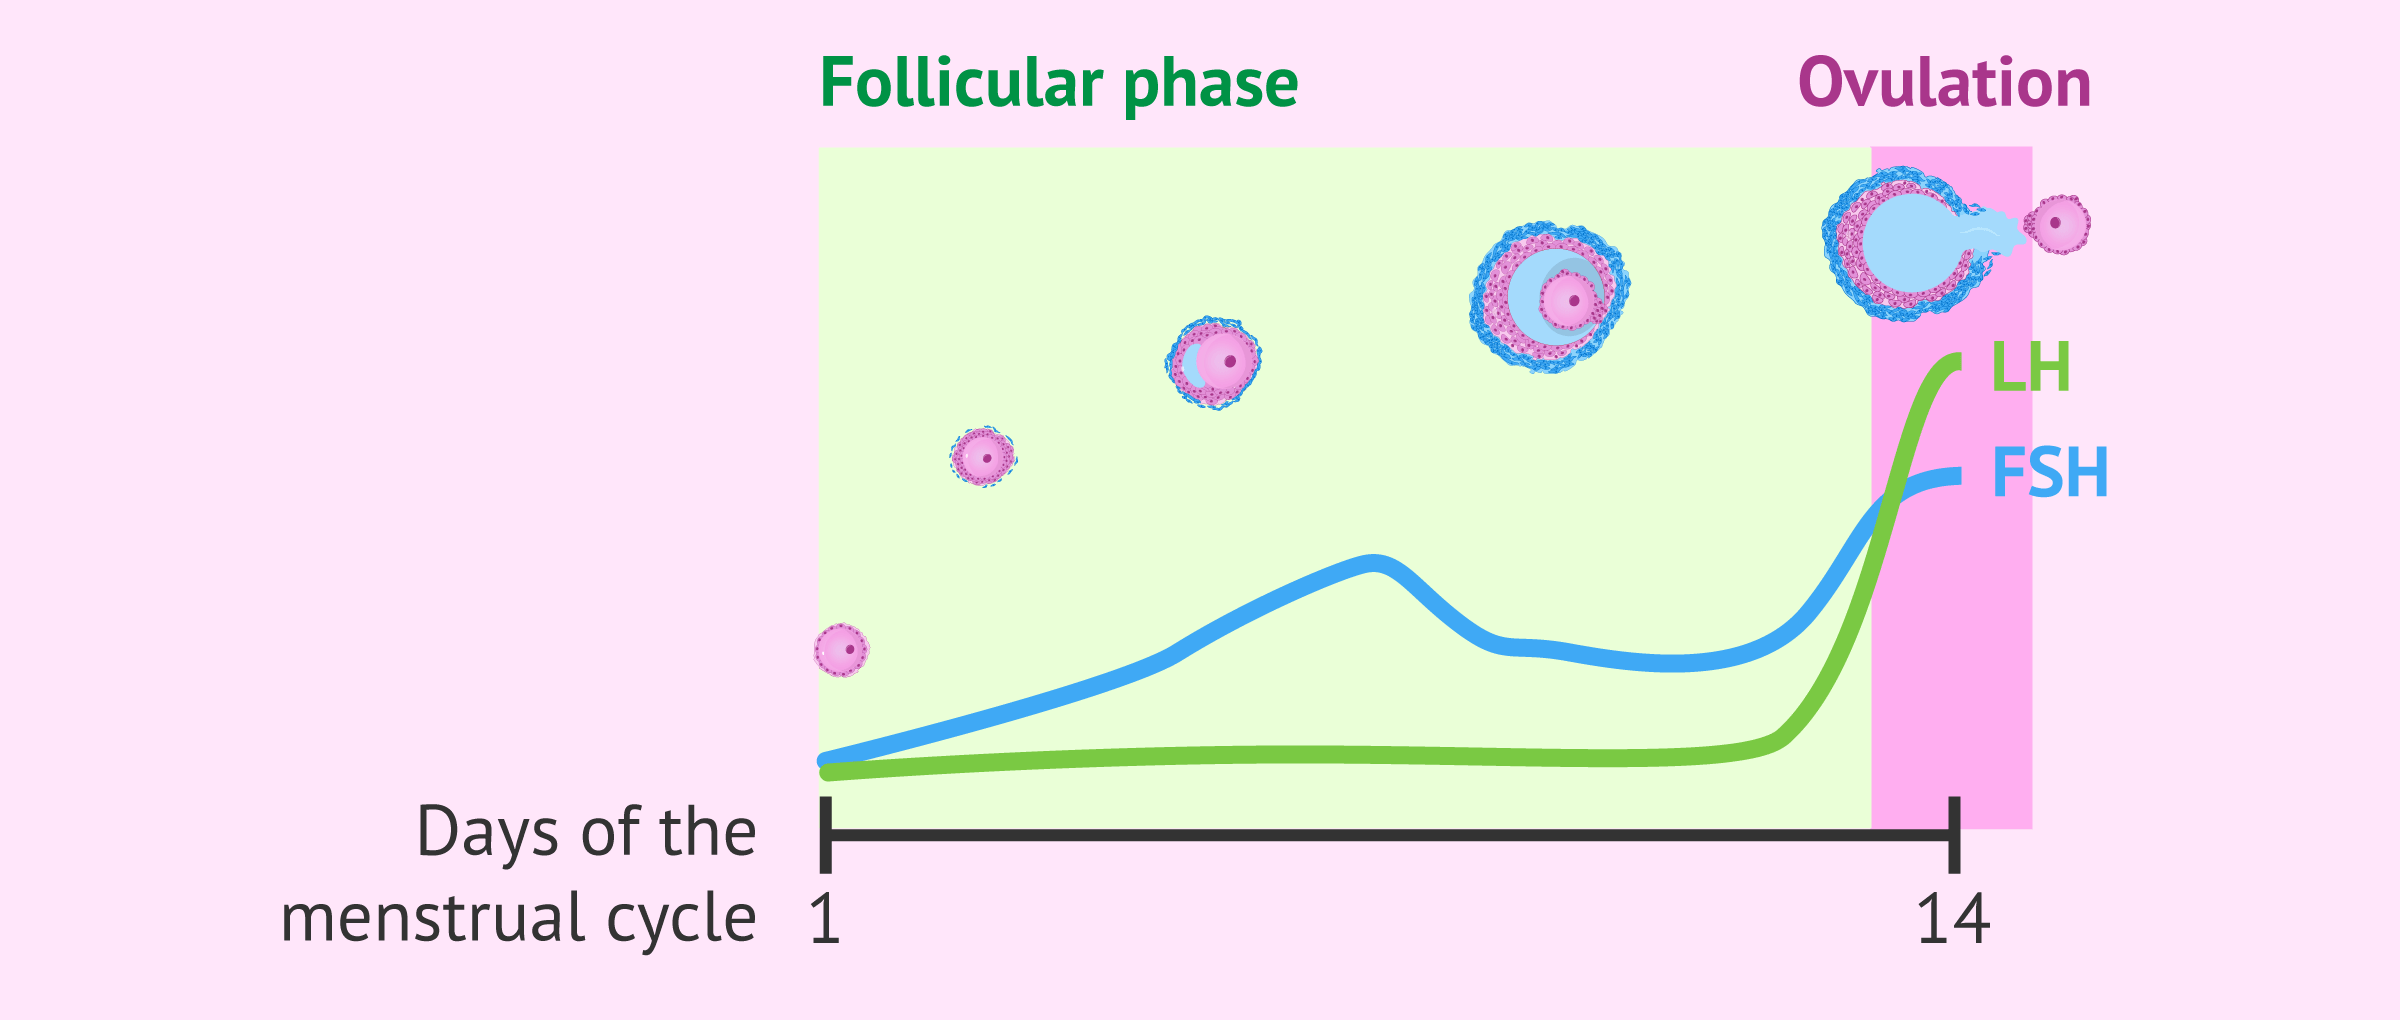 What is the duration of the follicular phase?